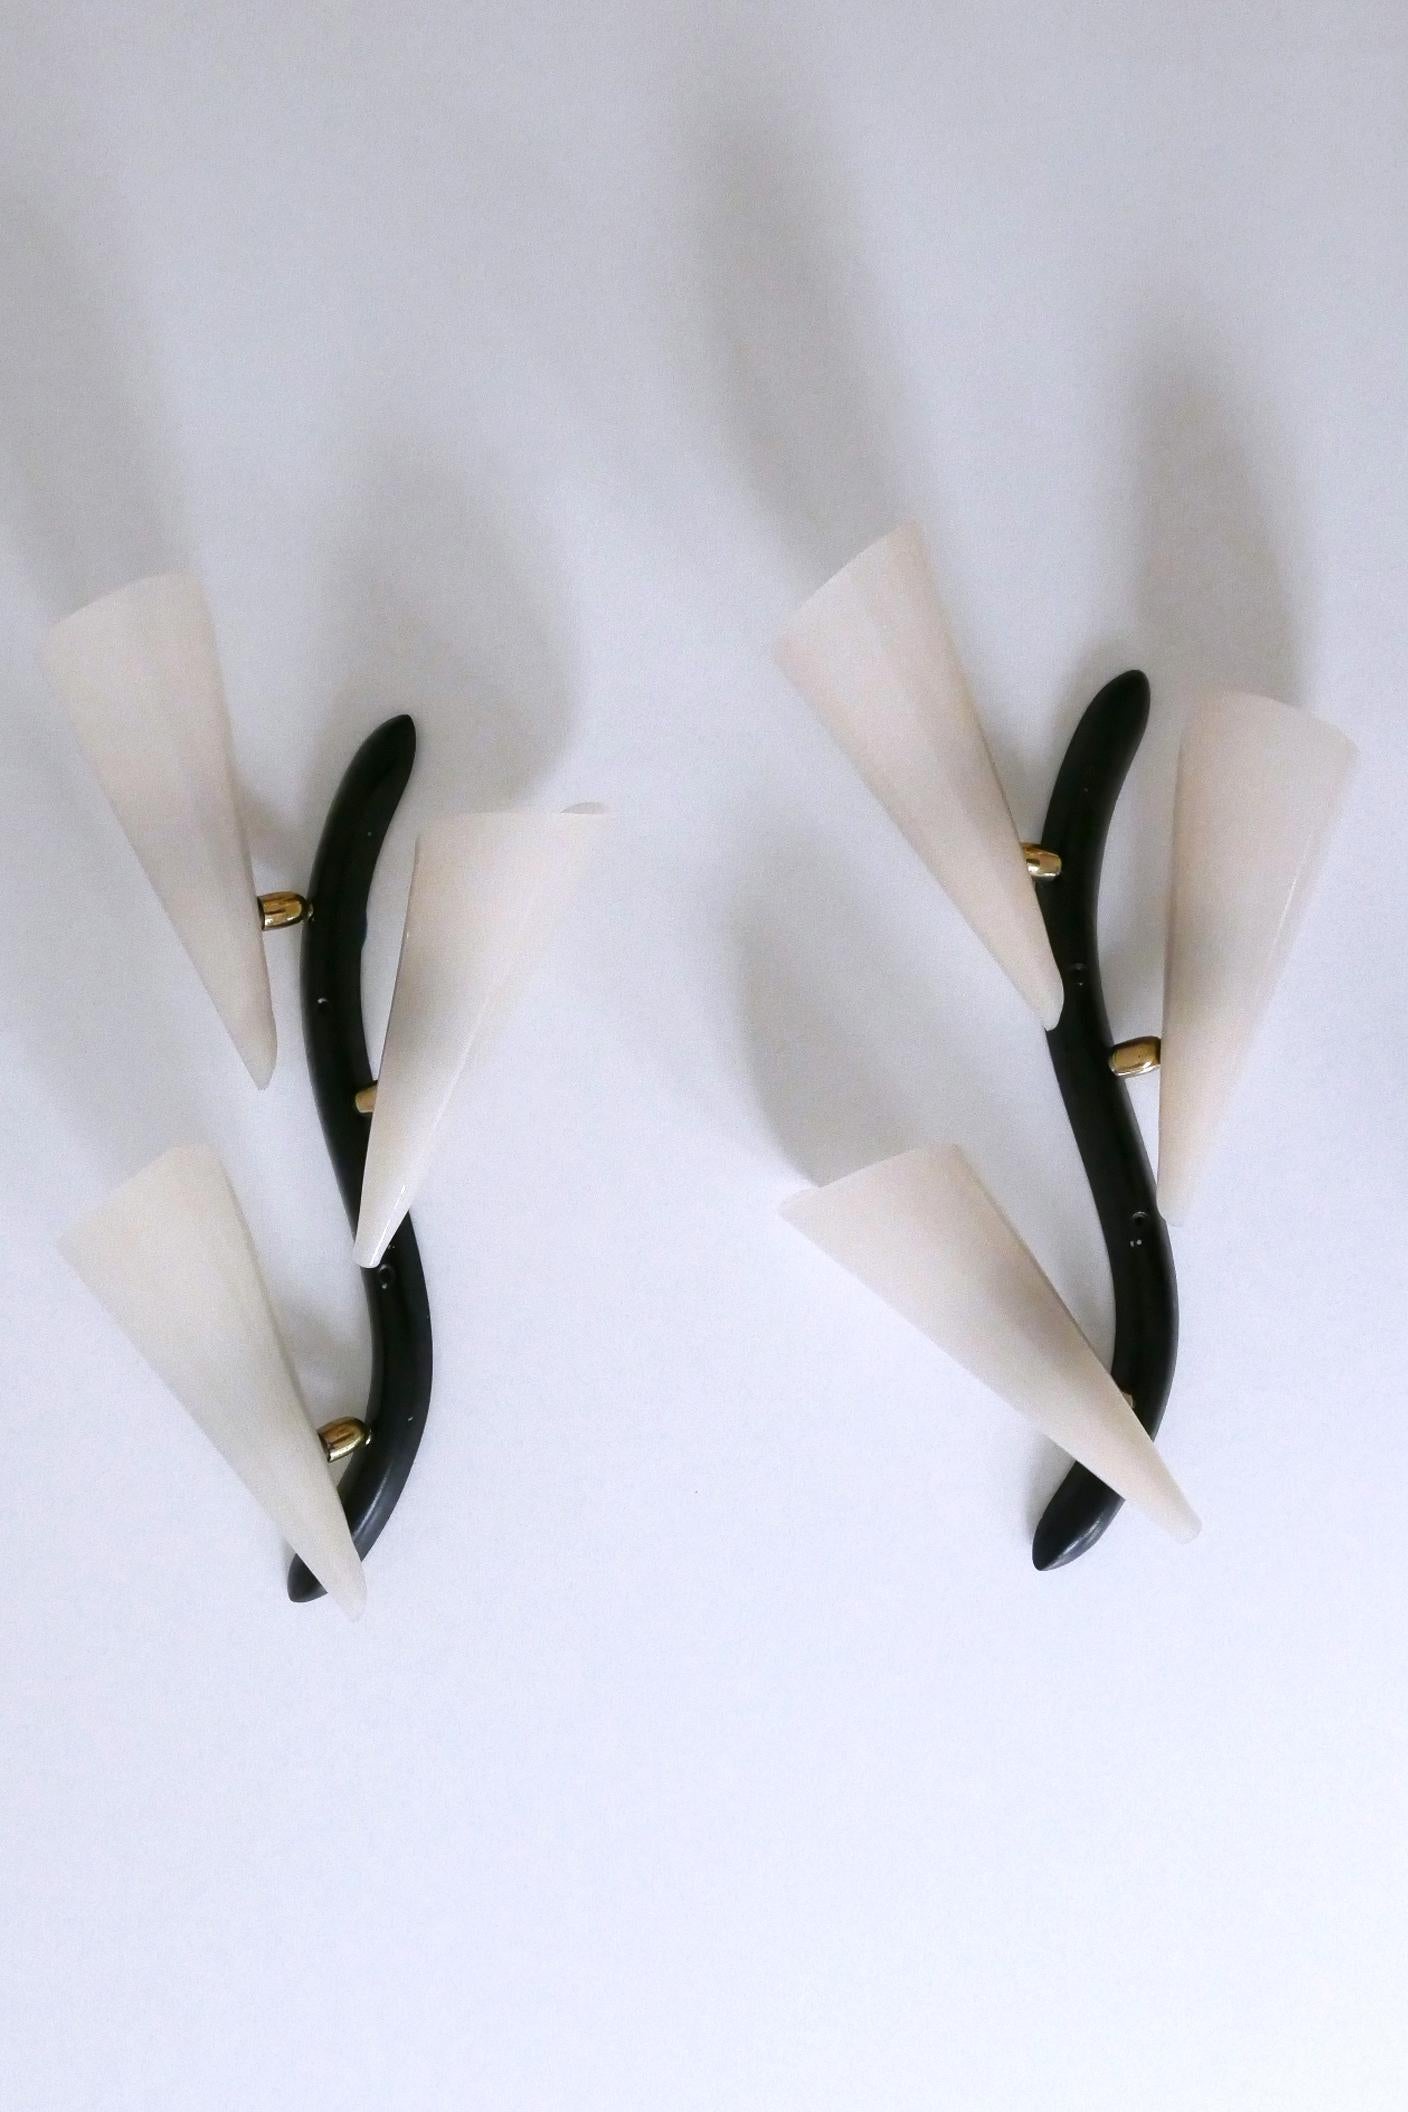 Set of two extremely rare, elegant and highly decorative Mid-Century Modern three-flamed sconces or wall fixtures. Designed and manufactured probably in Germany, 1950s.

Executed in lucite and cast aluminum, each sconce is executed with 3 x E14 /